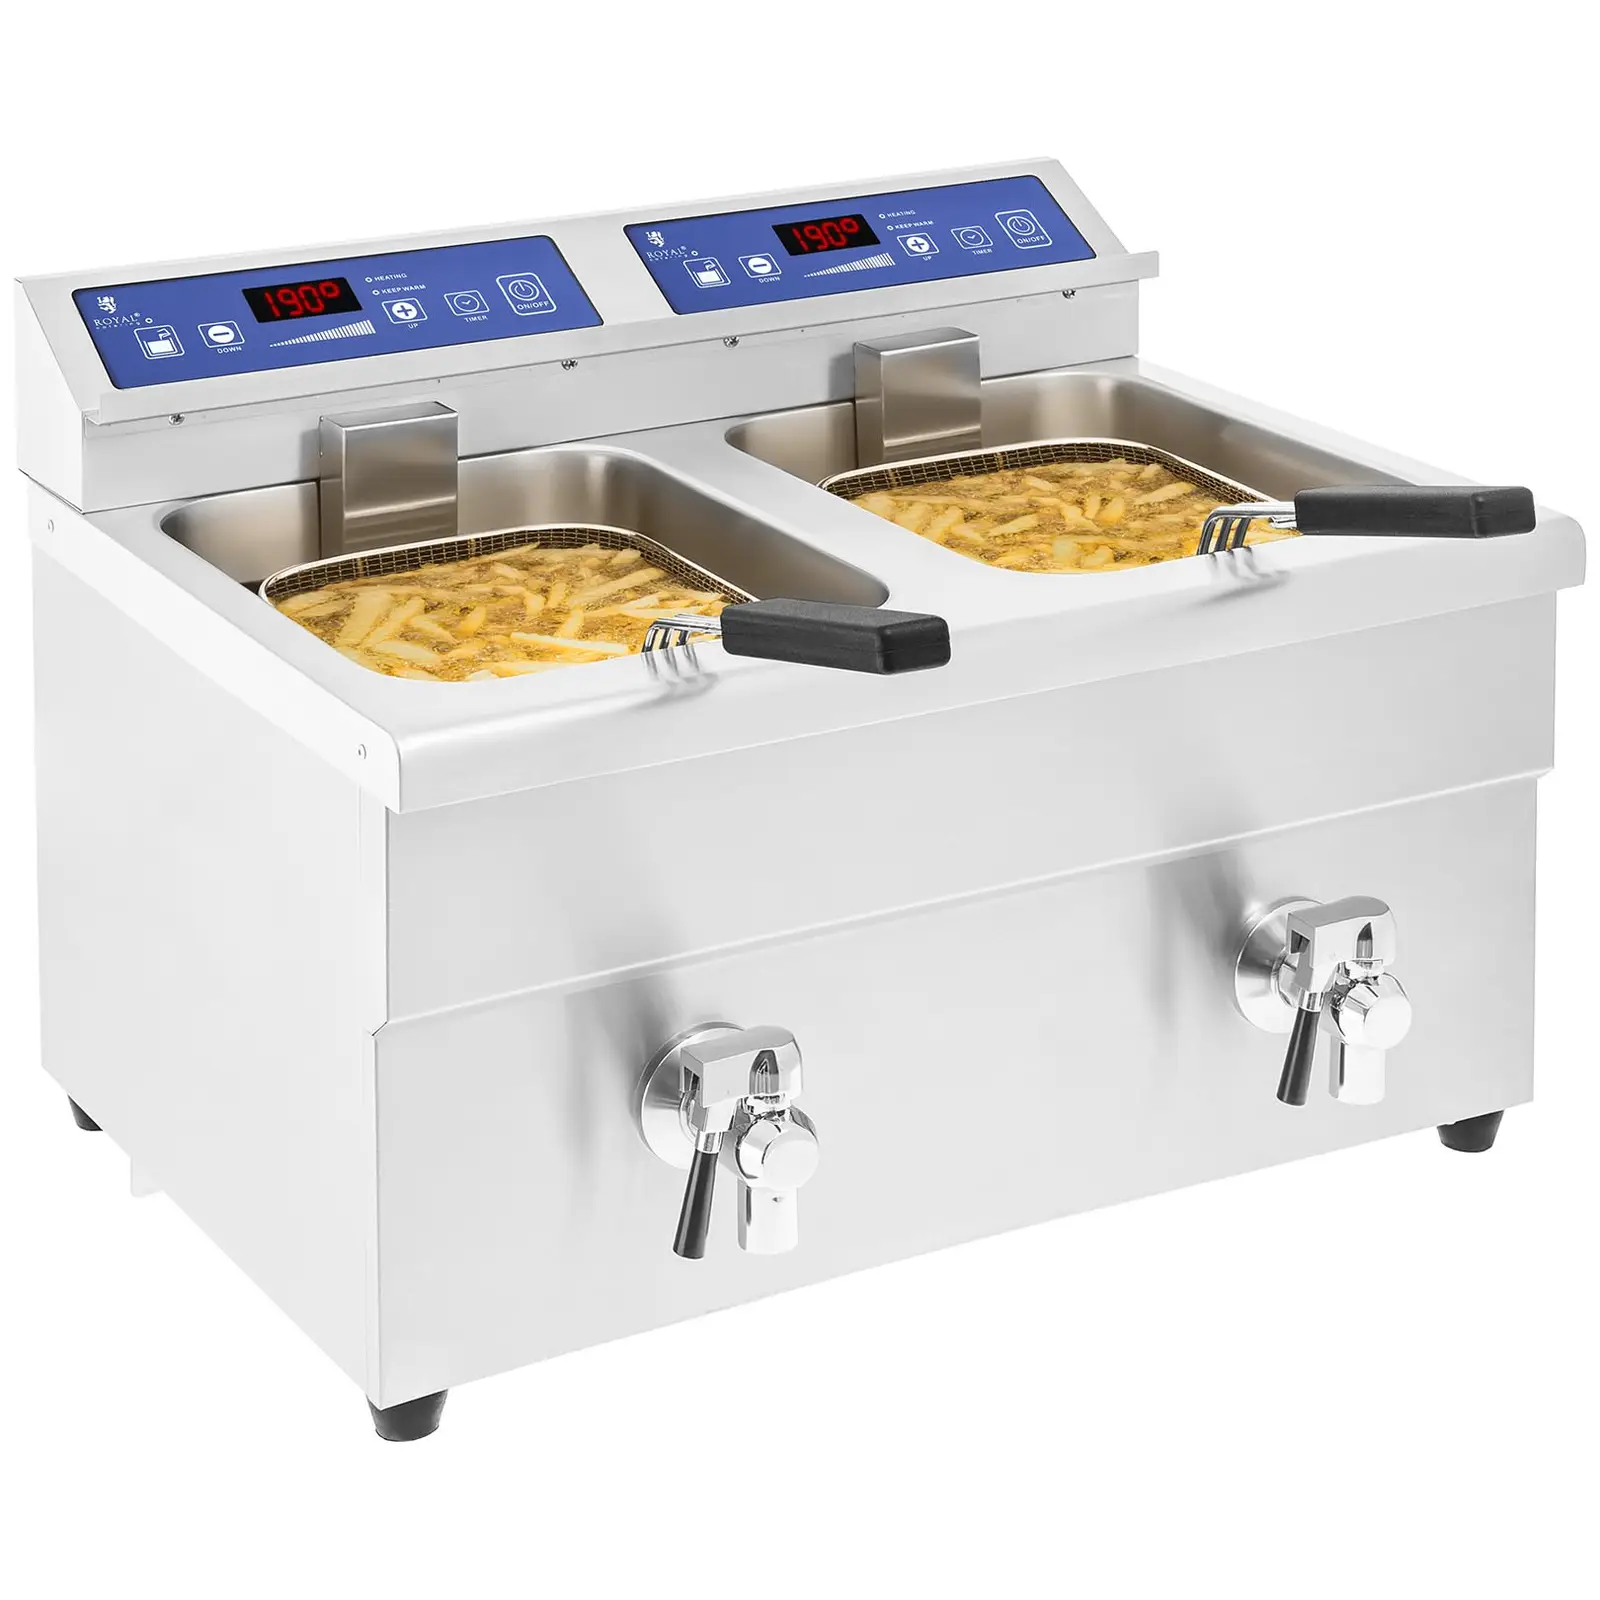 Induction Deep Fat Fryer - 2 x 10 litres - 60 to 190°C